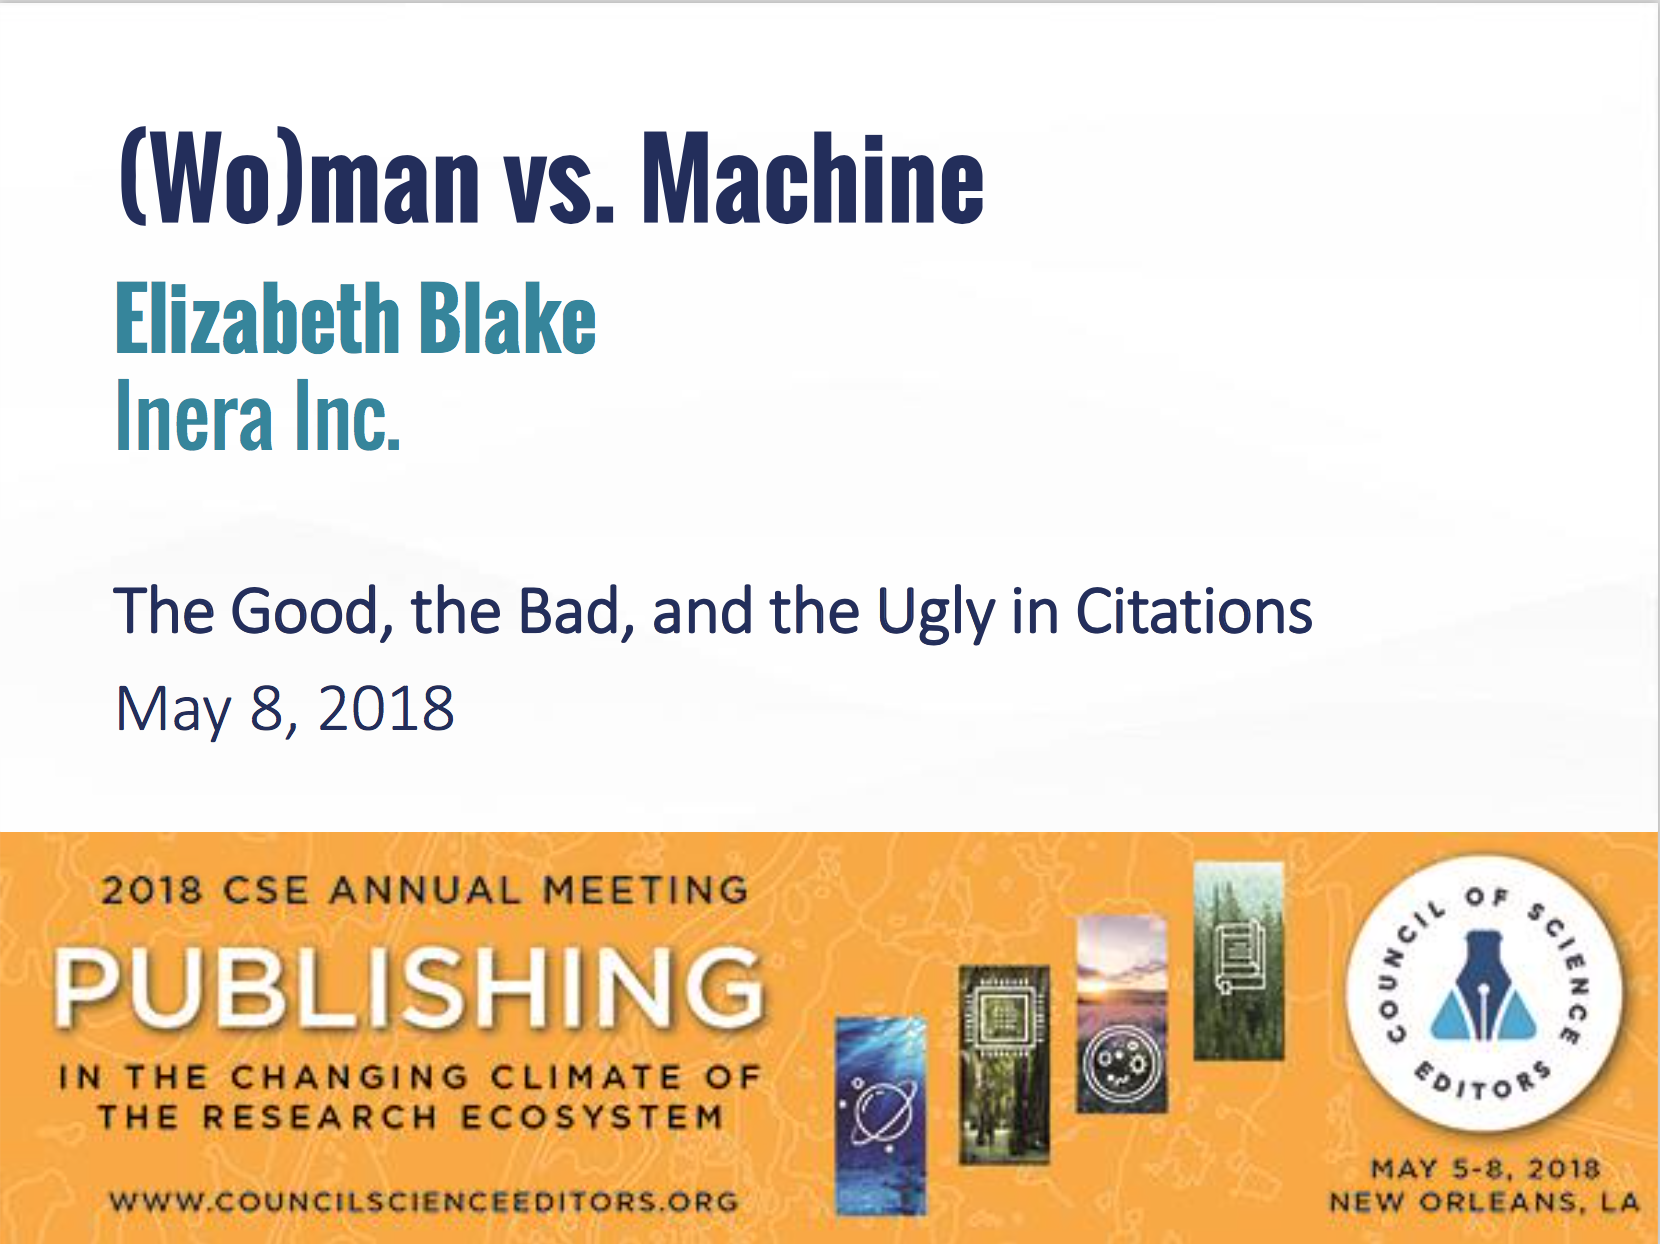 Title slide: (Wo)man vs. Machine. Elizabeth Blake, Inera Inc. The Good, the Bad, and the Ugly in Citations. May 8, 2018.